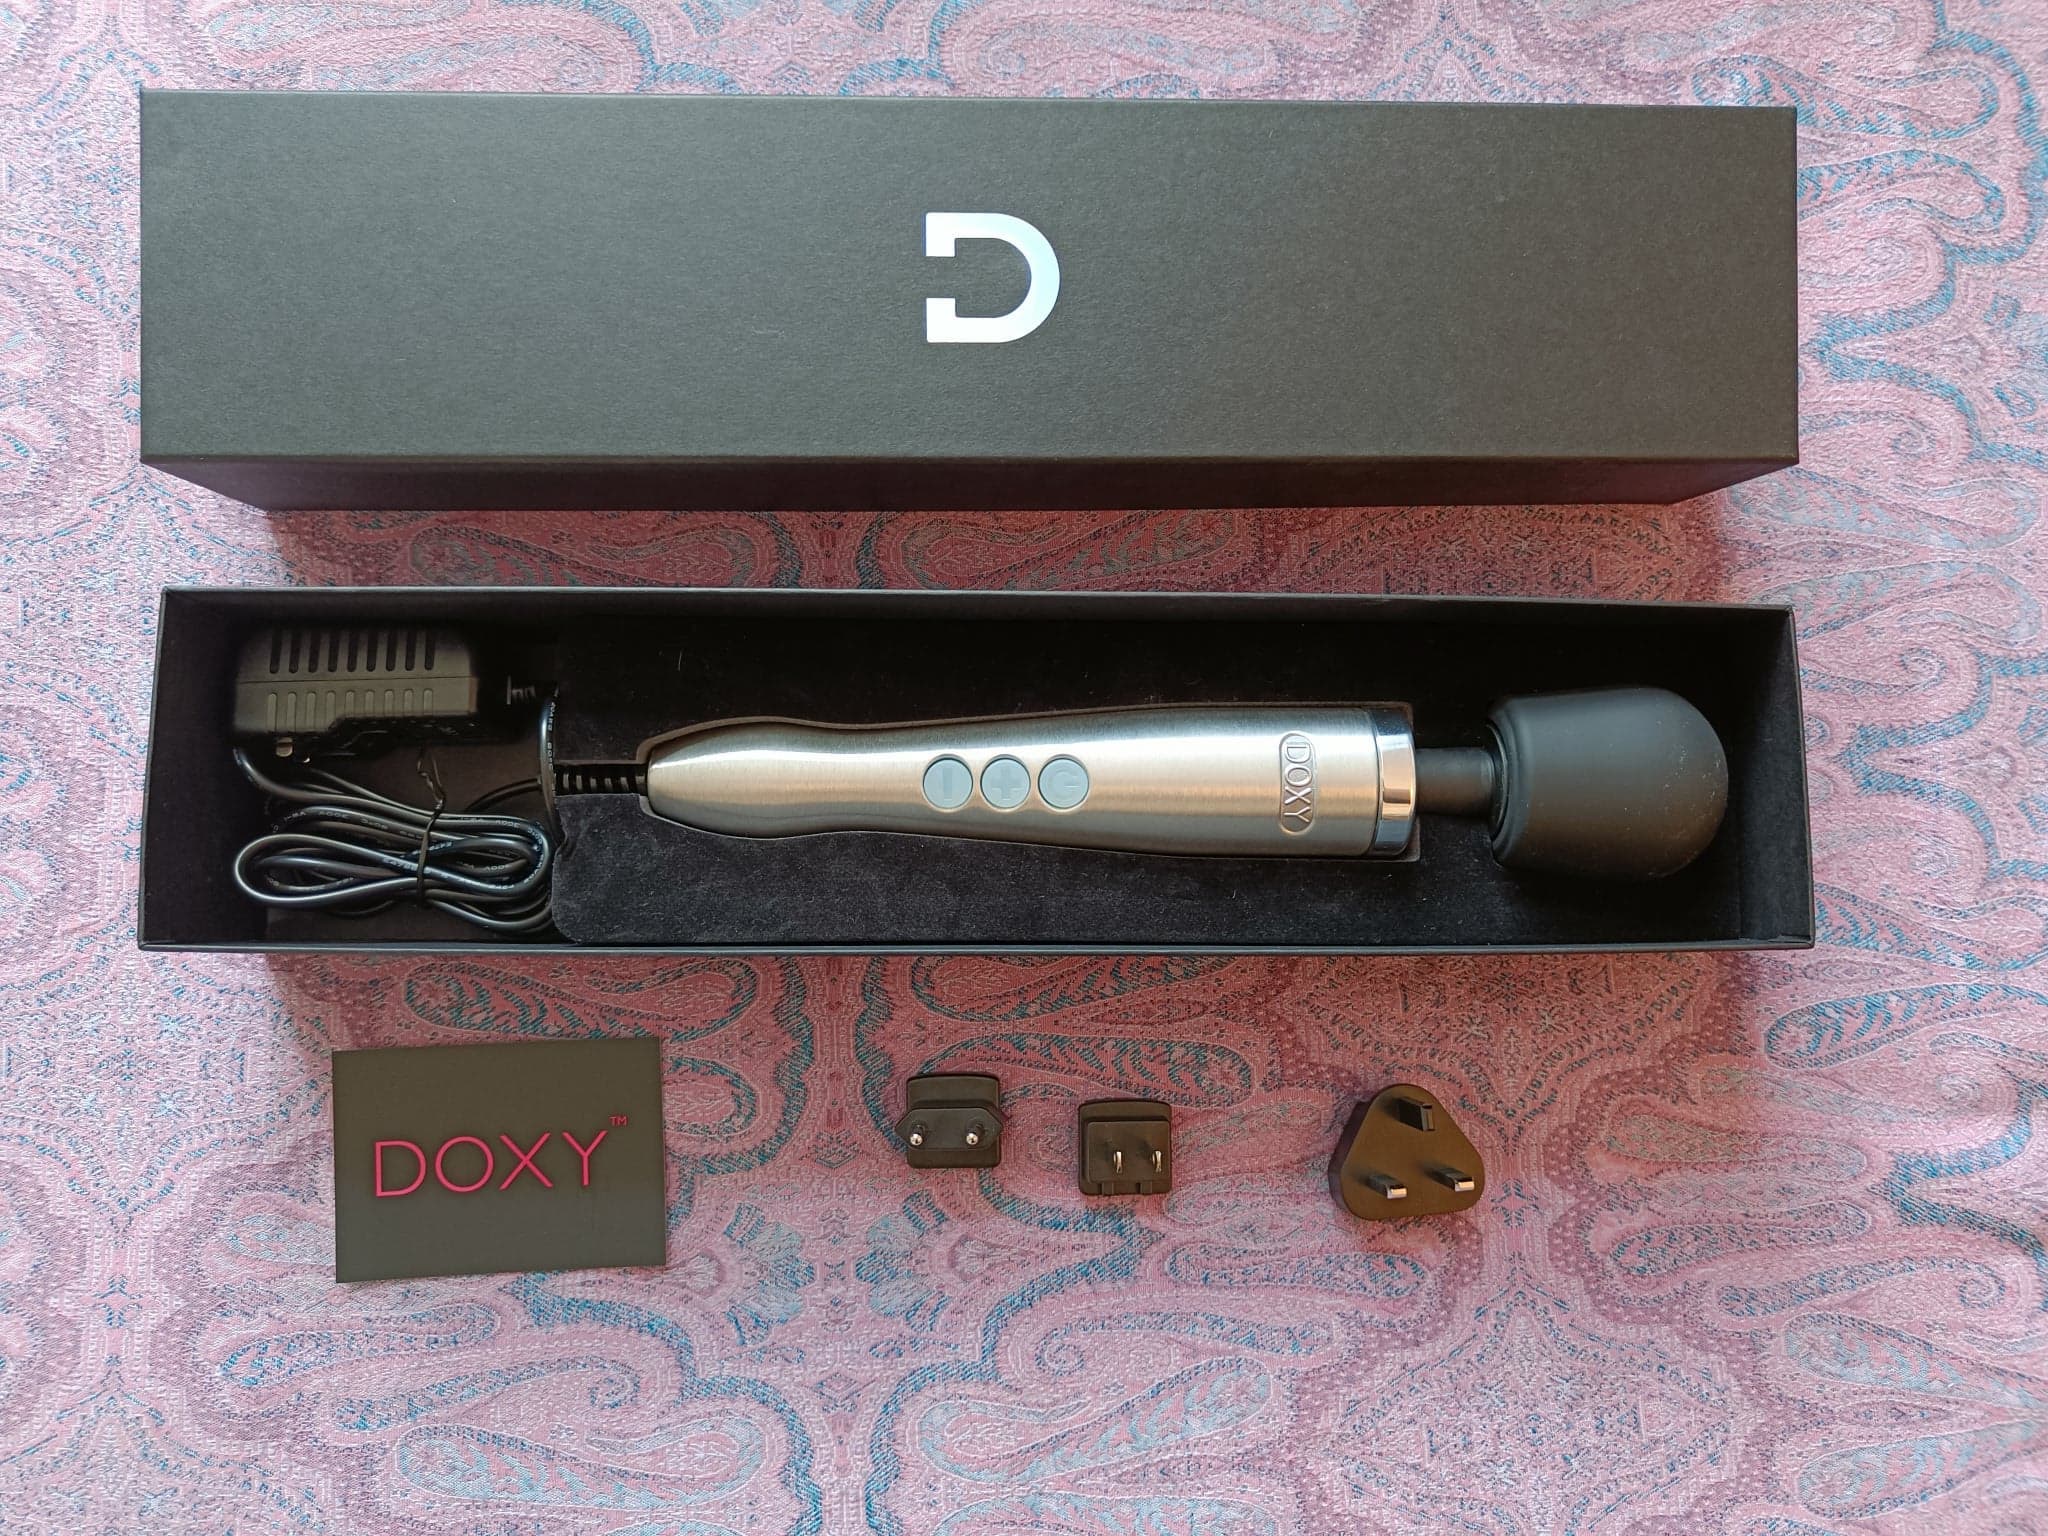 Doxy Die Cast Affordability Check: The Price of Doxy Die Cast